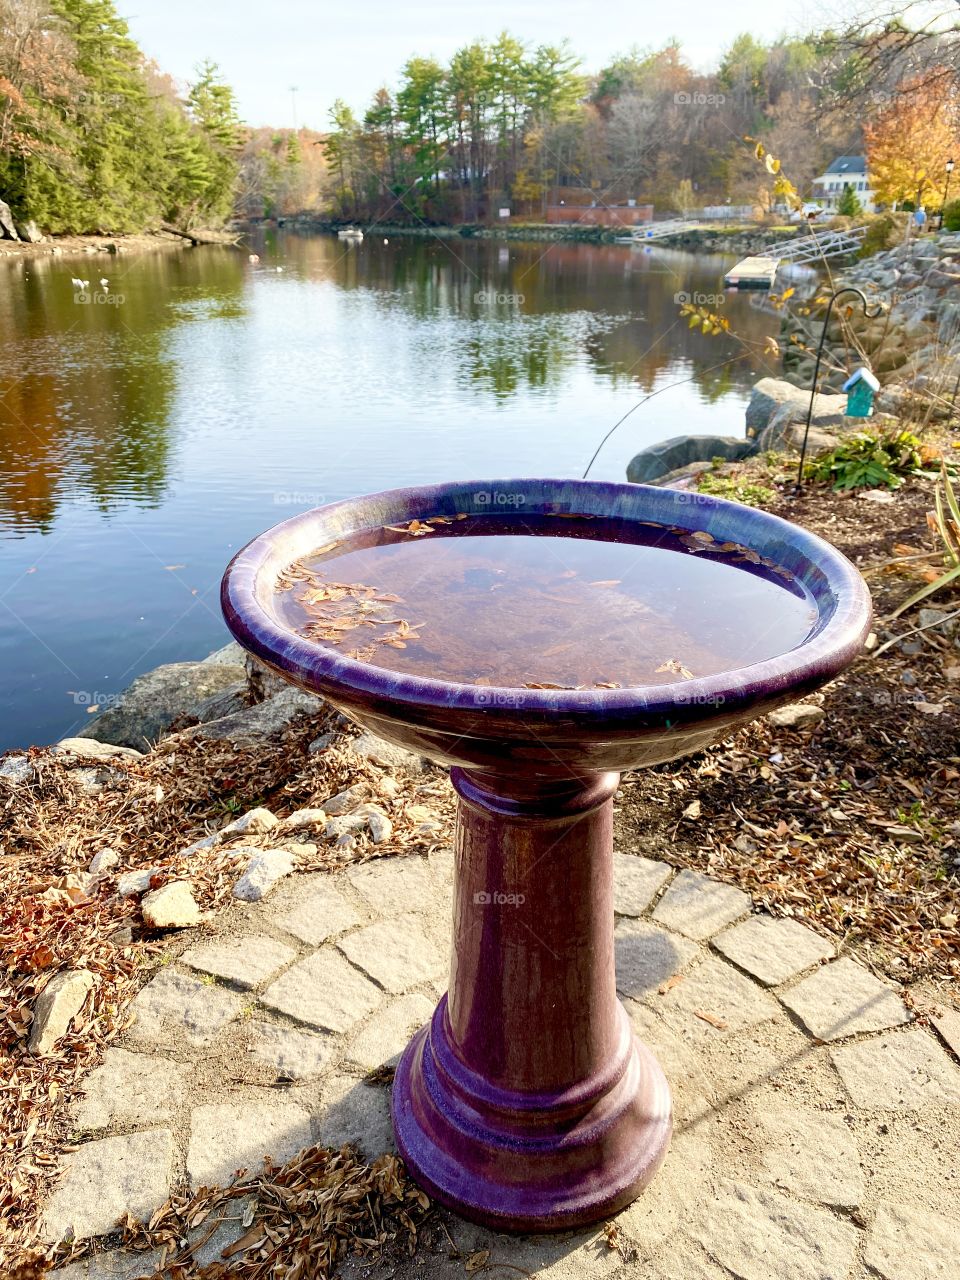 Bird water fountain in a beautiful place by the river. Green and yellow trees. Autumn season 